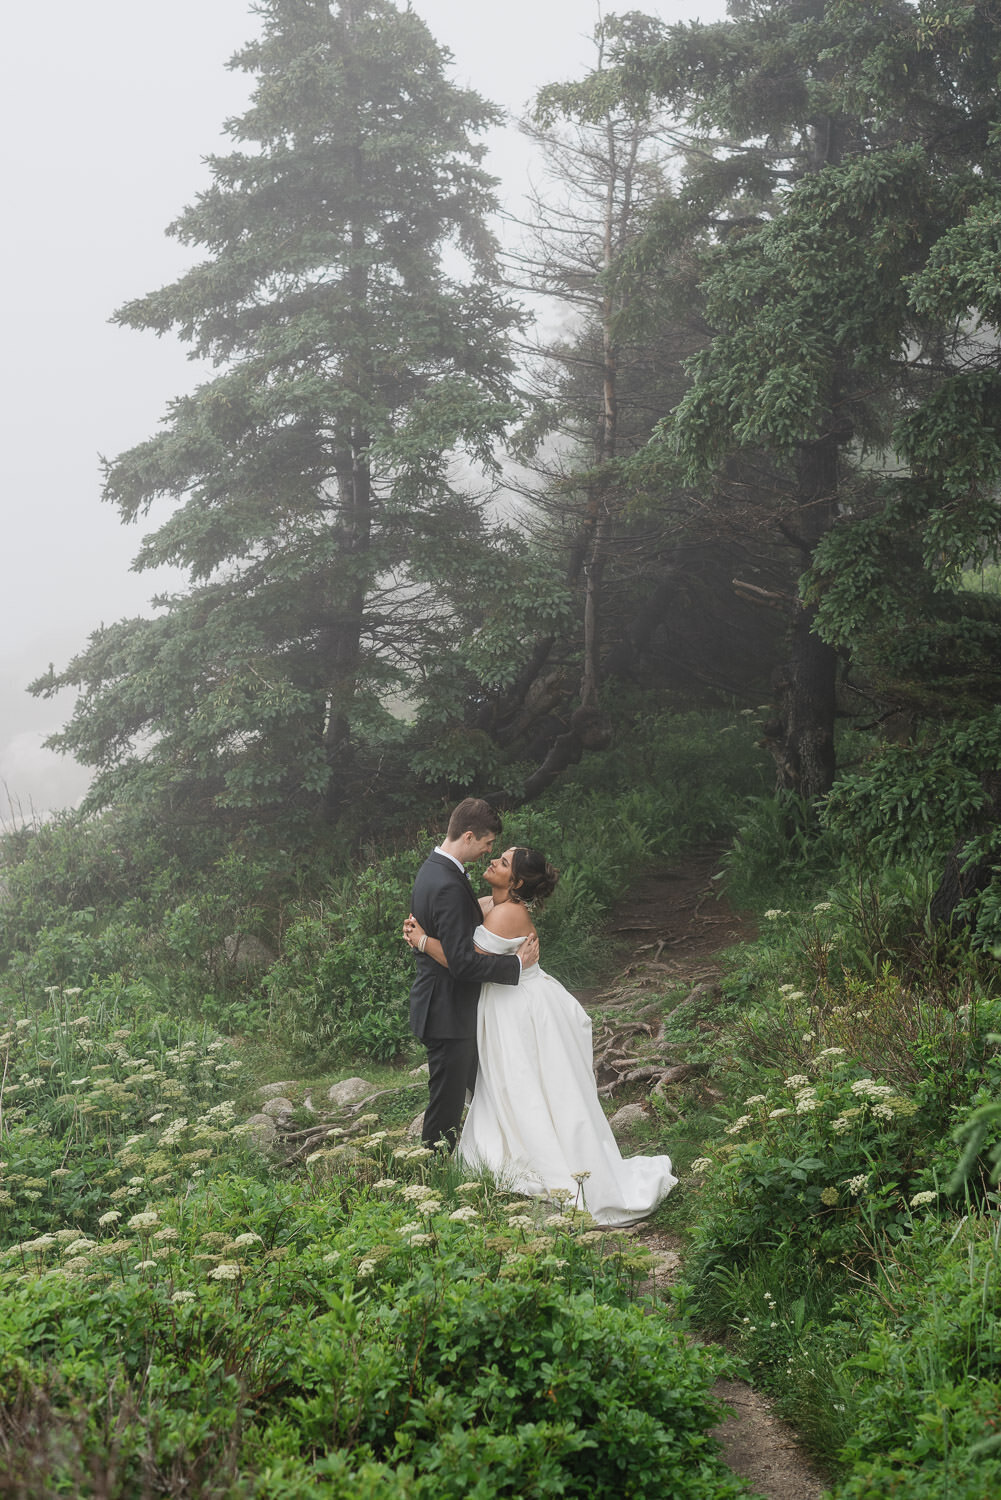 Intimate moment between bride and groom in misty forest by the sea in Nova Scotia.